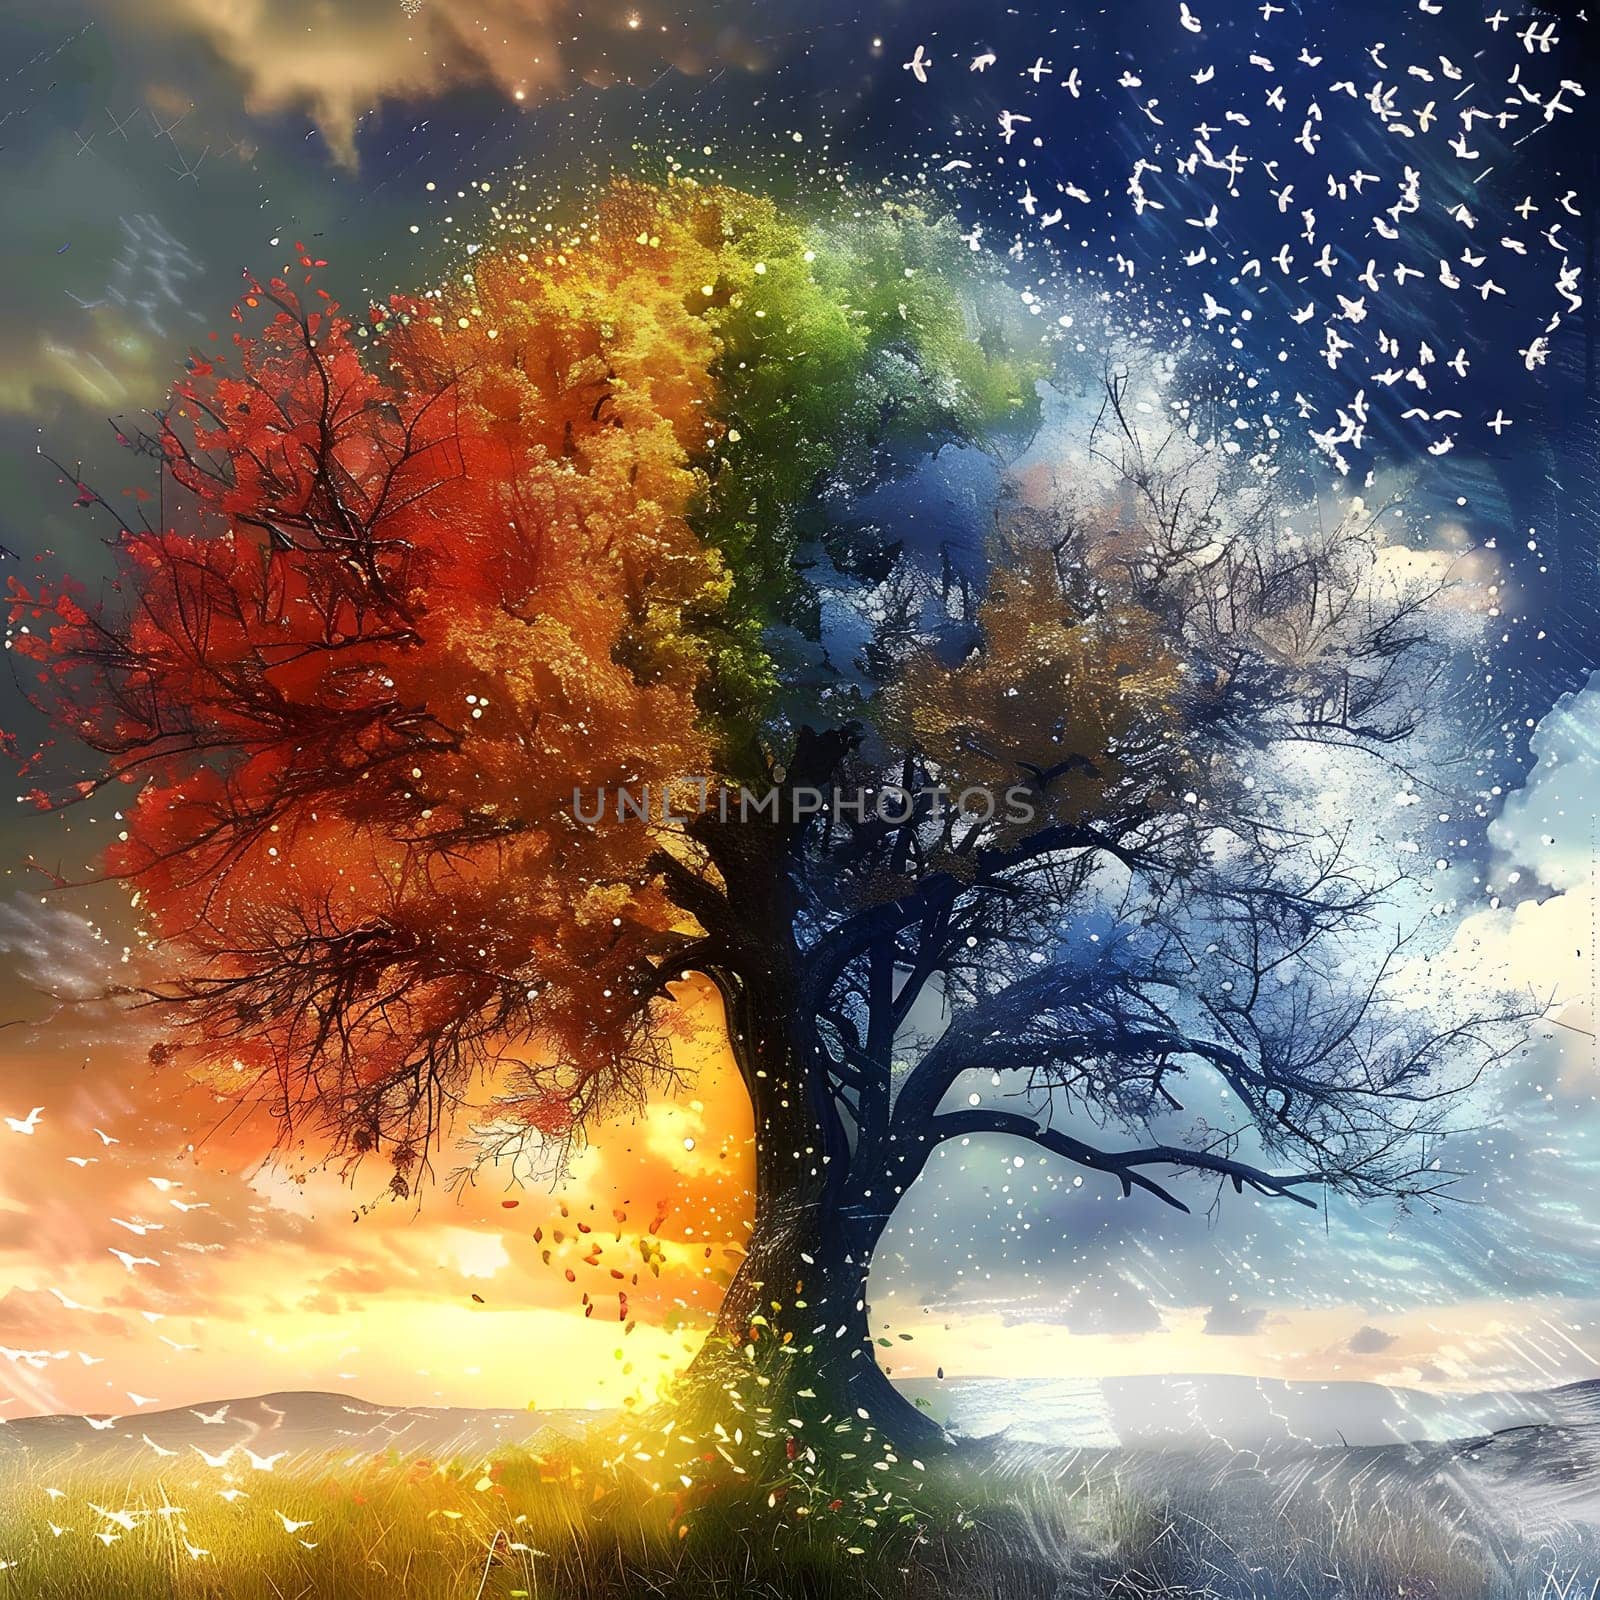 A mesmerizing painting depicting a tree as it transitions through the four seasons, capturing the changing atmosphere, sky, and natural landscapes